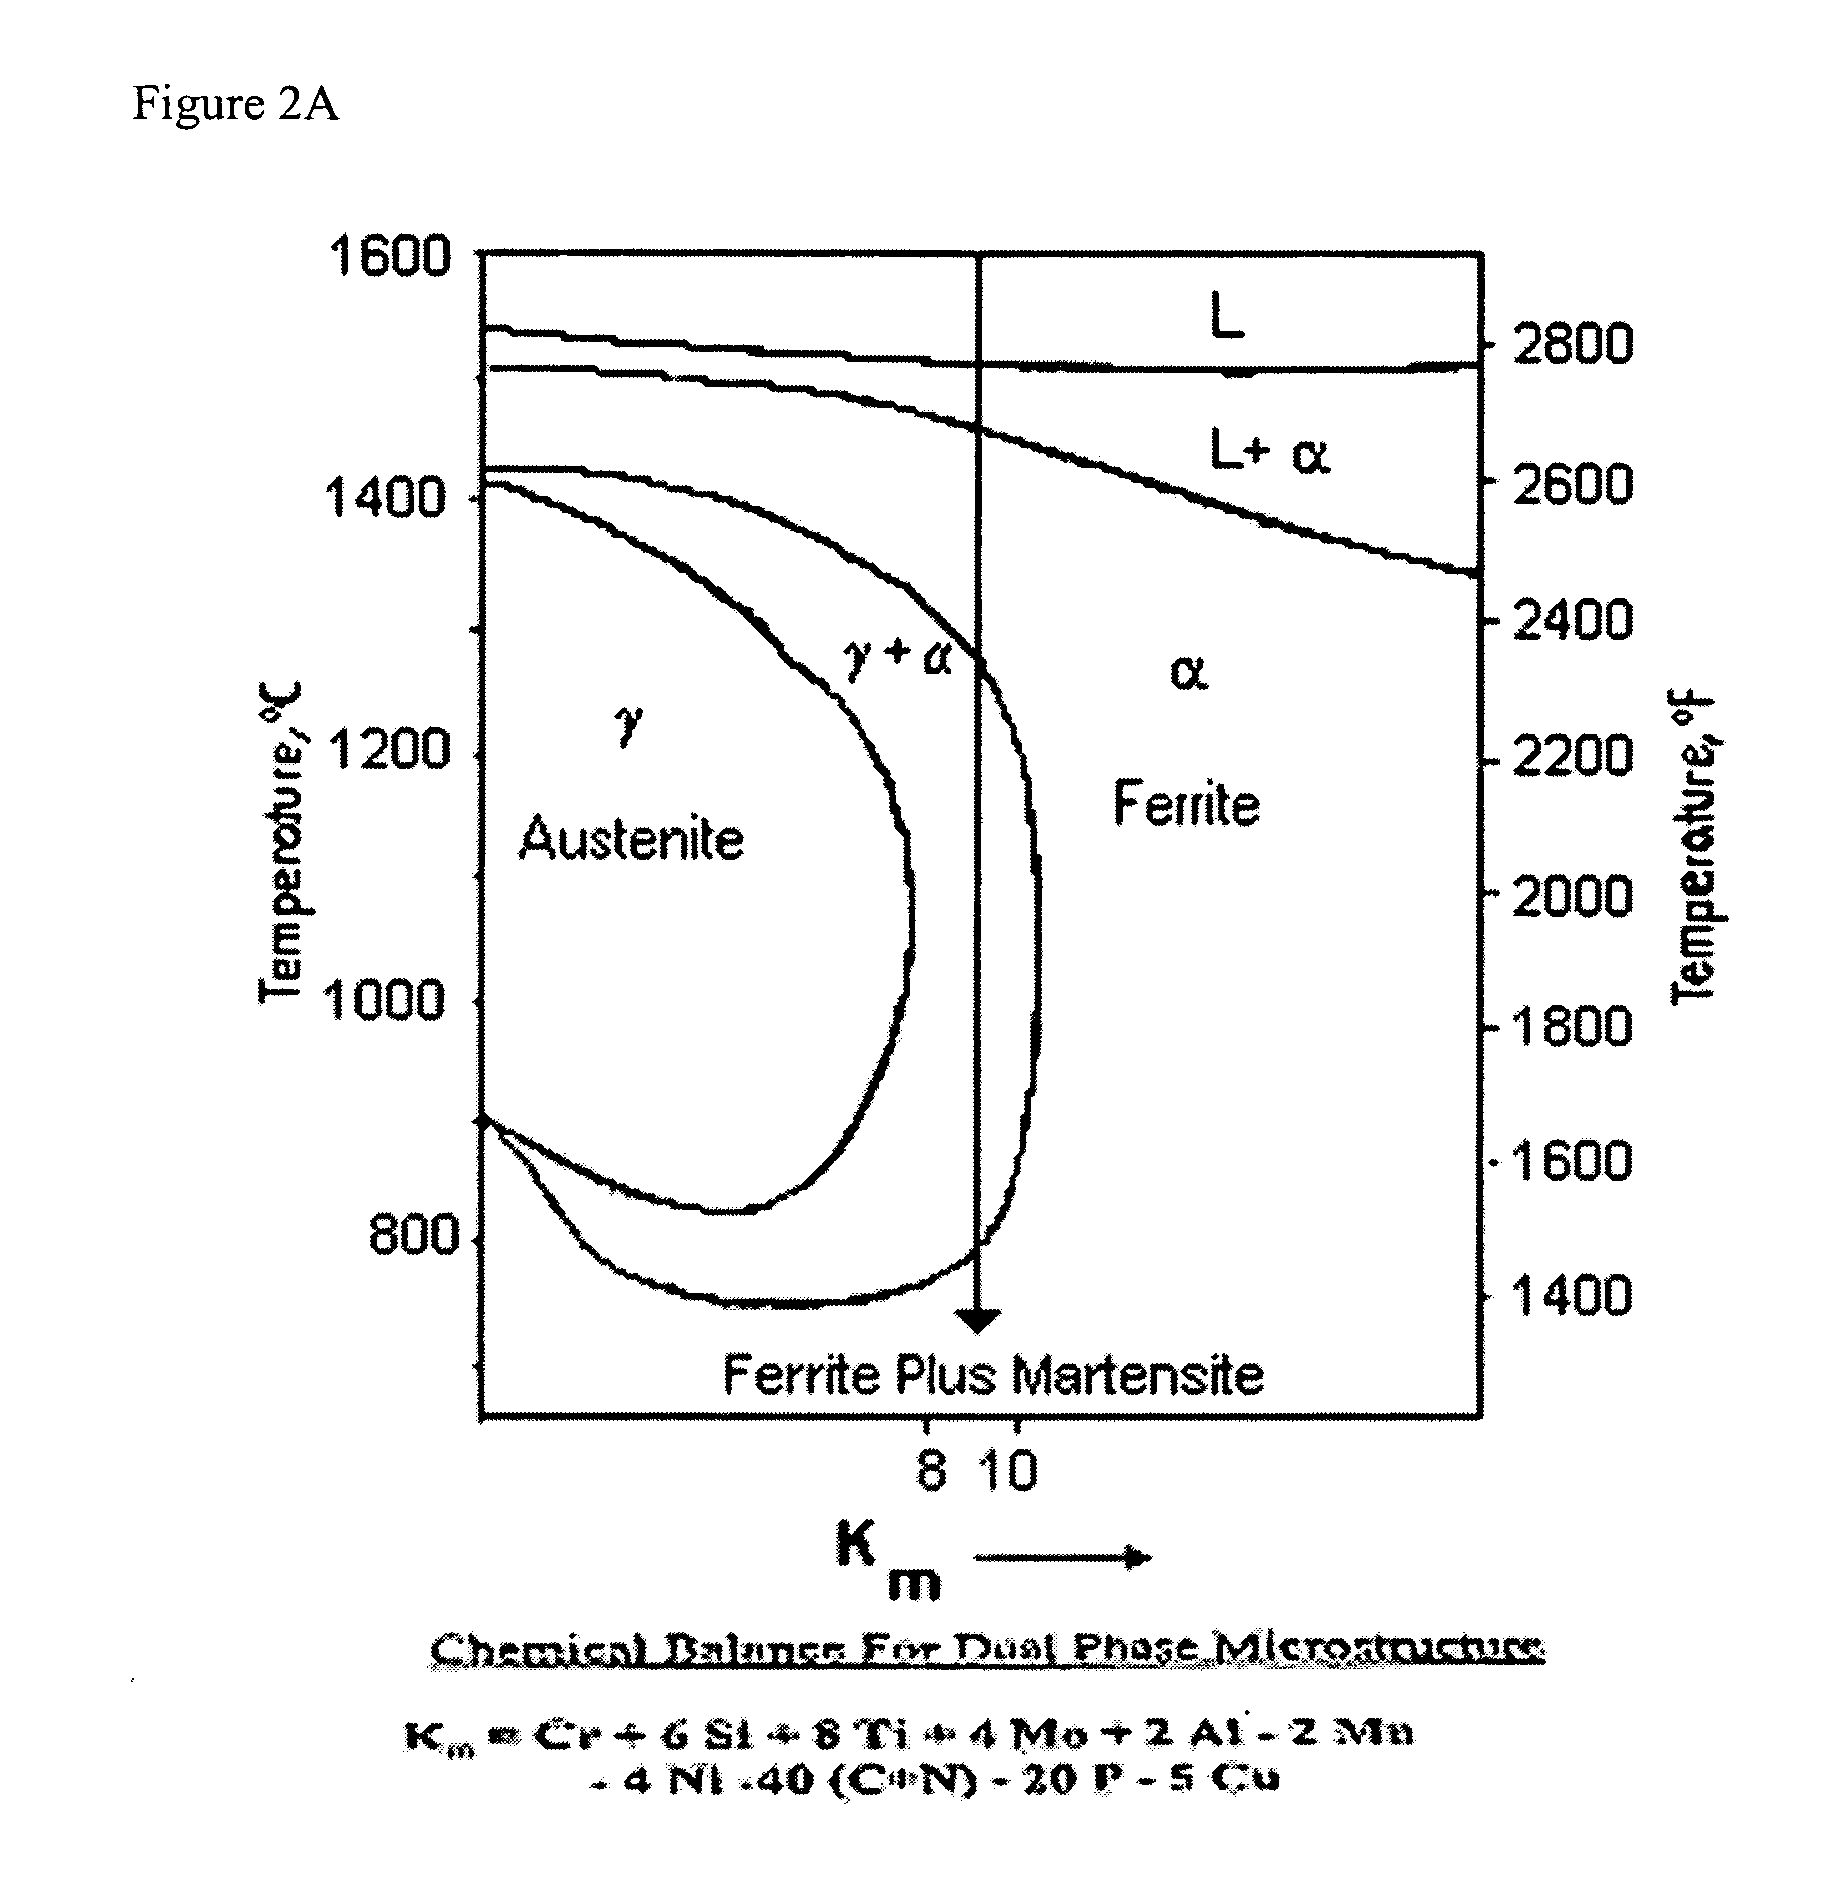 Corrosion resistant metallurgical powder compositions, methods, and compacted articles